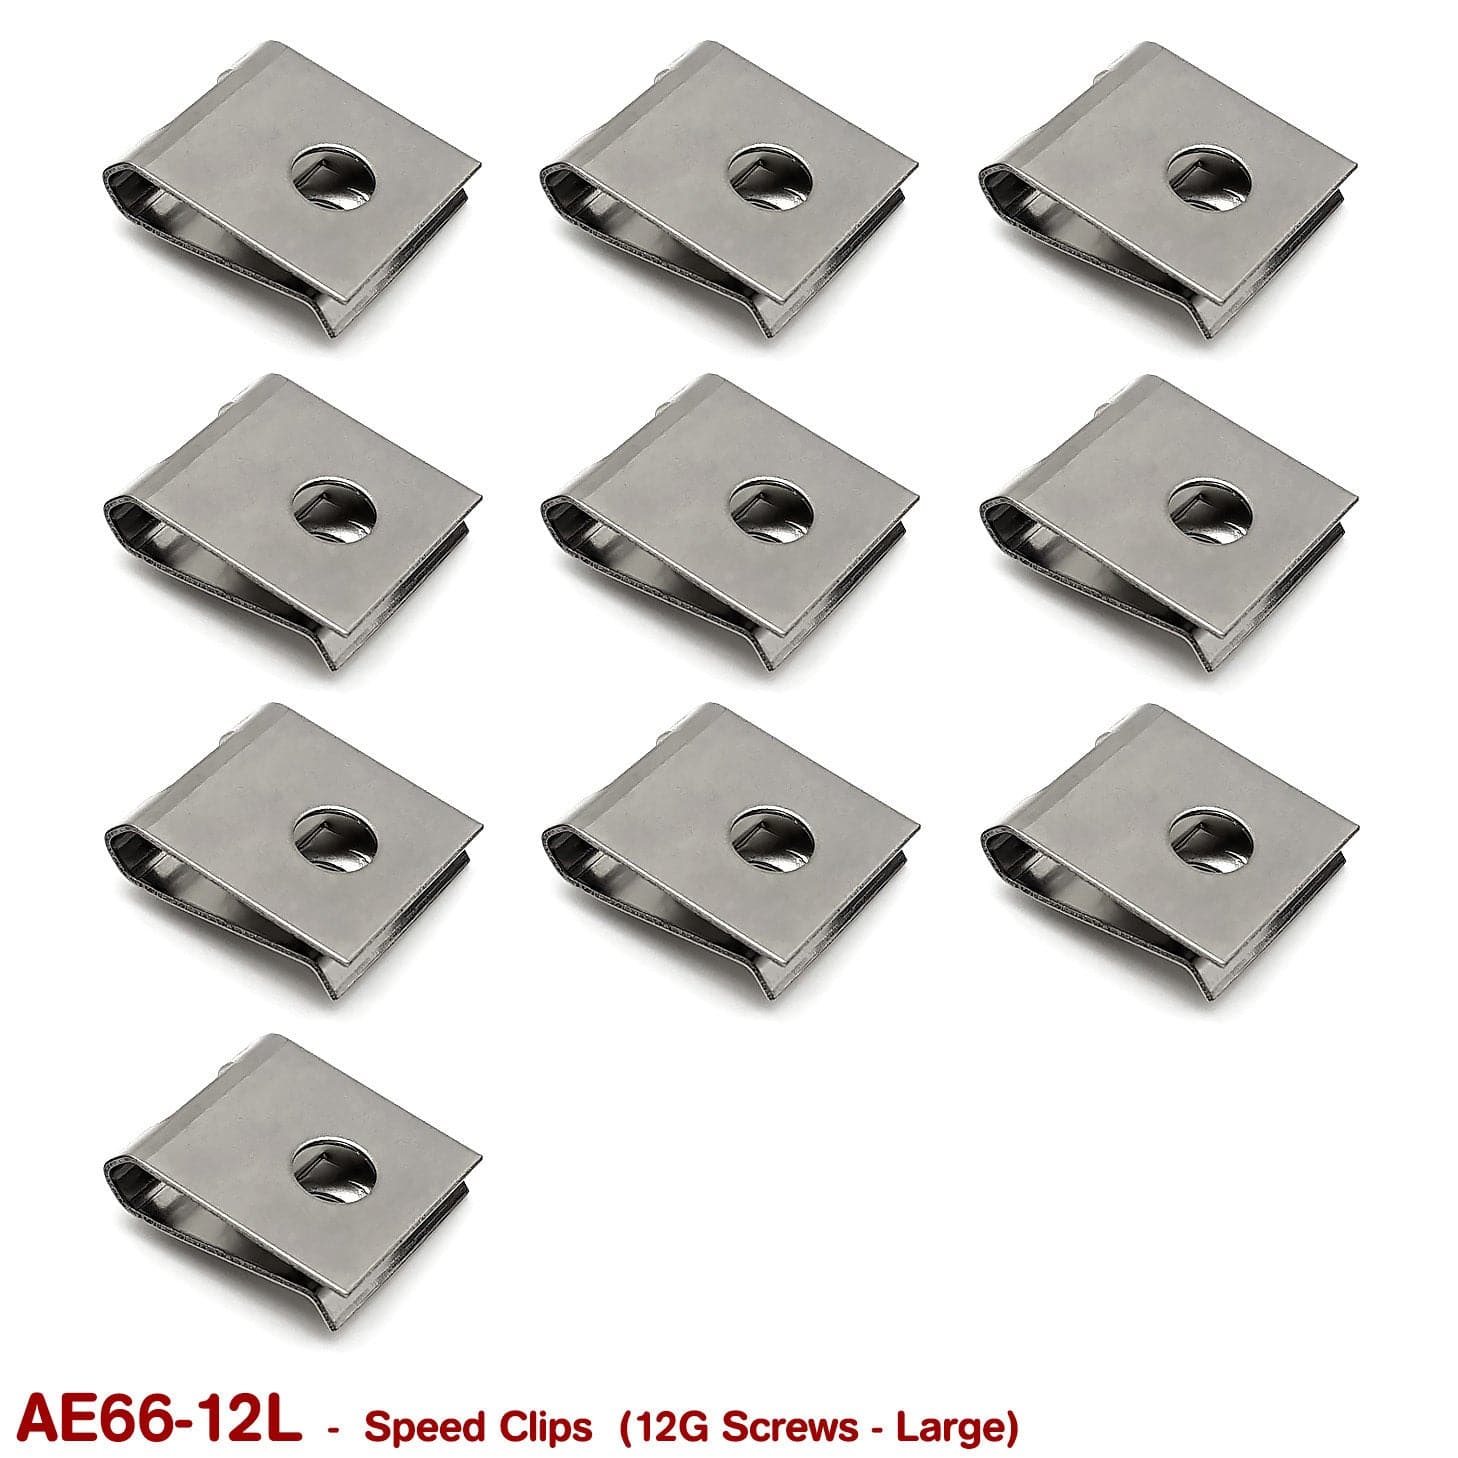 SCREW SPEED CLIPS - 12G LARGE  (STAINLESS STEEL)